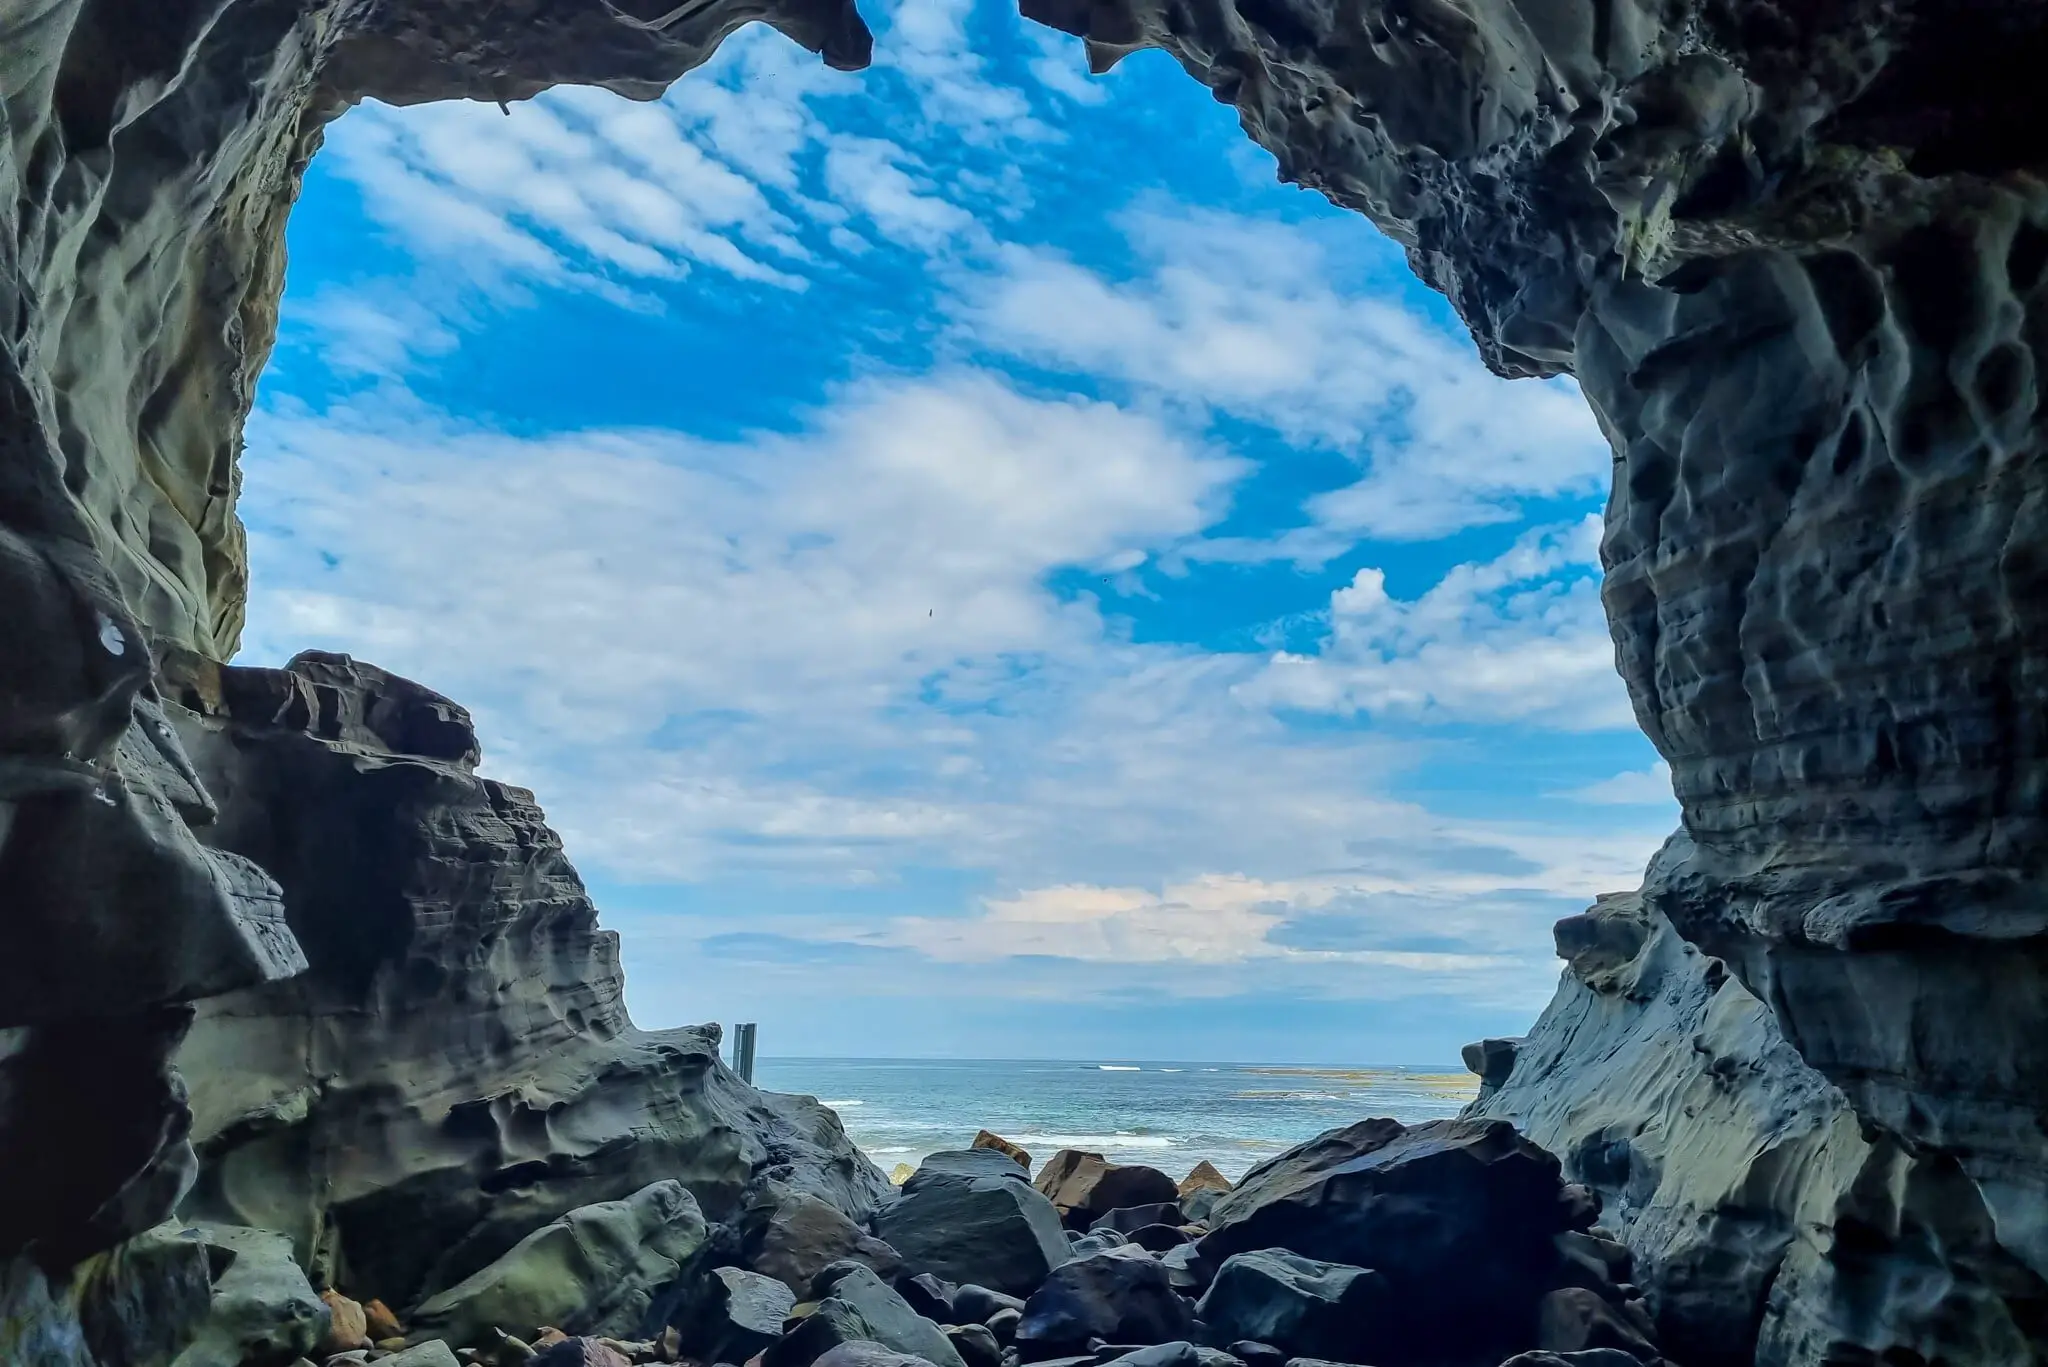 Discover Dinosaurs & Cool Caves at Inverloch